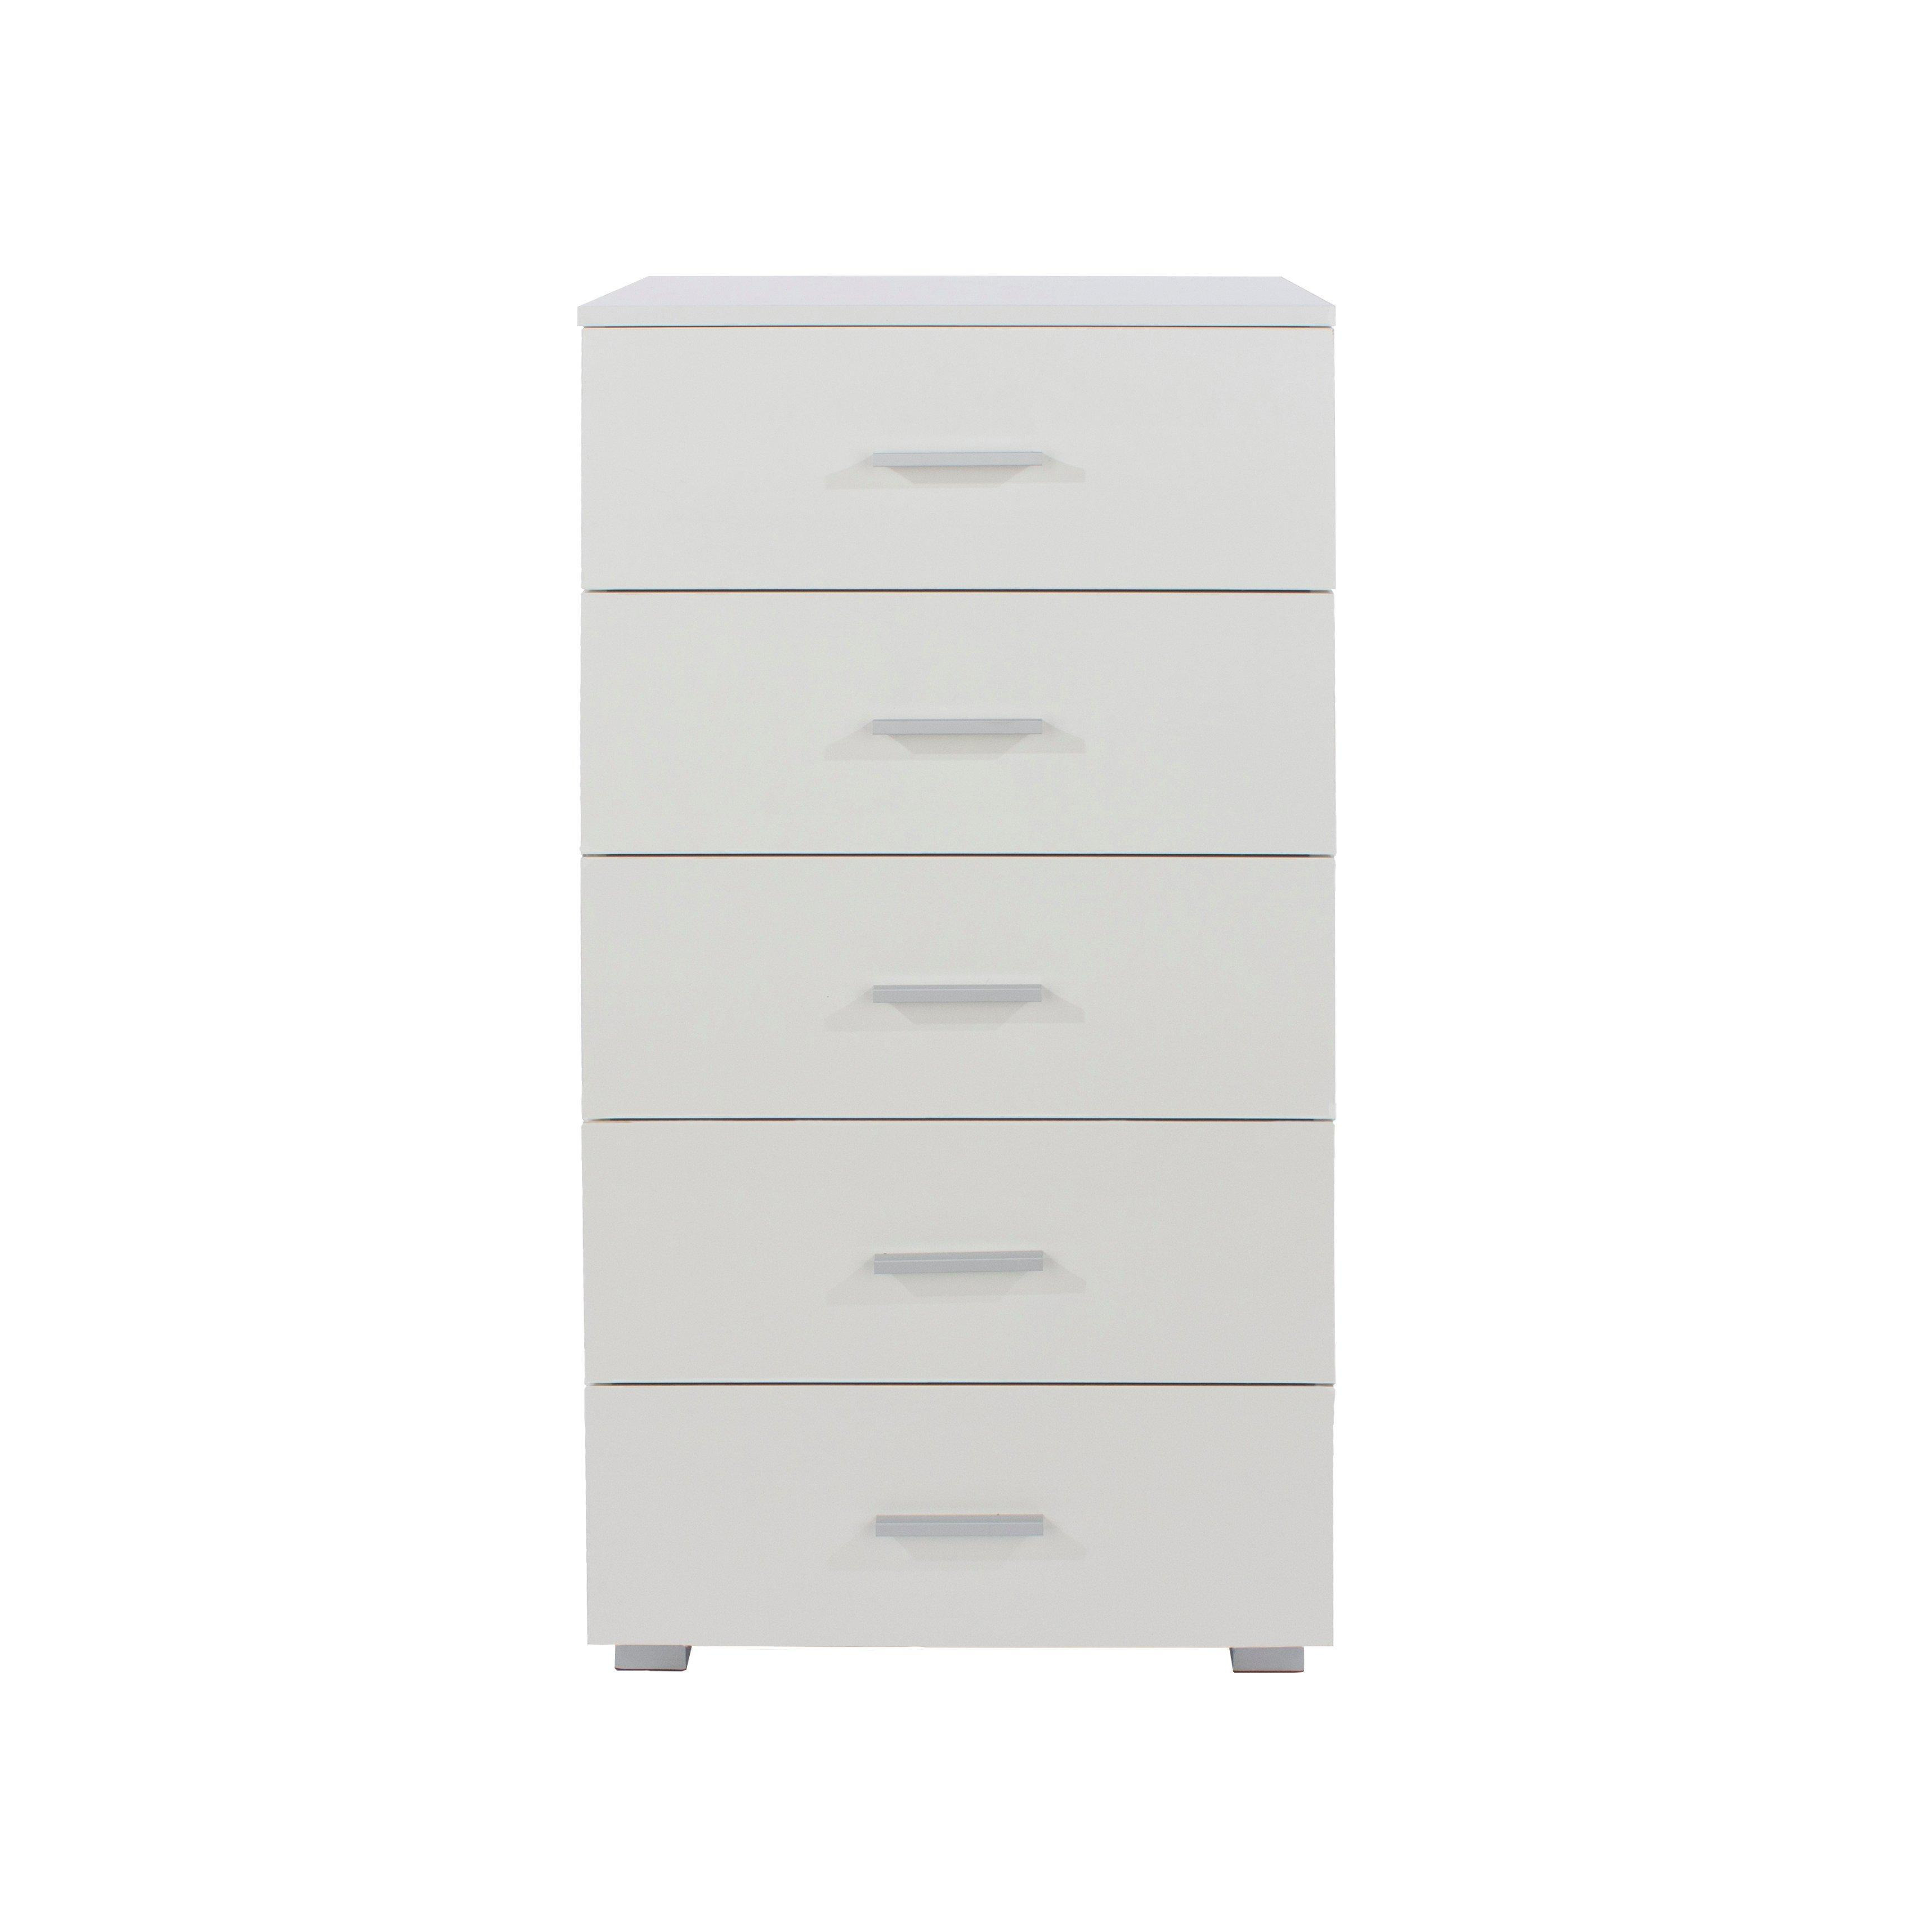 Lido 5 Narrow Tall Chest Of Drawers - image 1